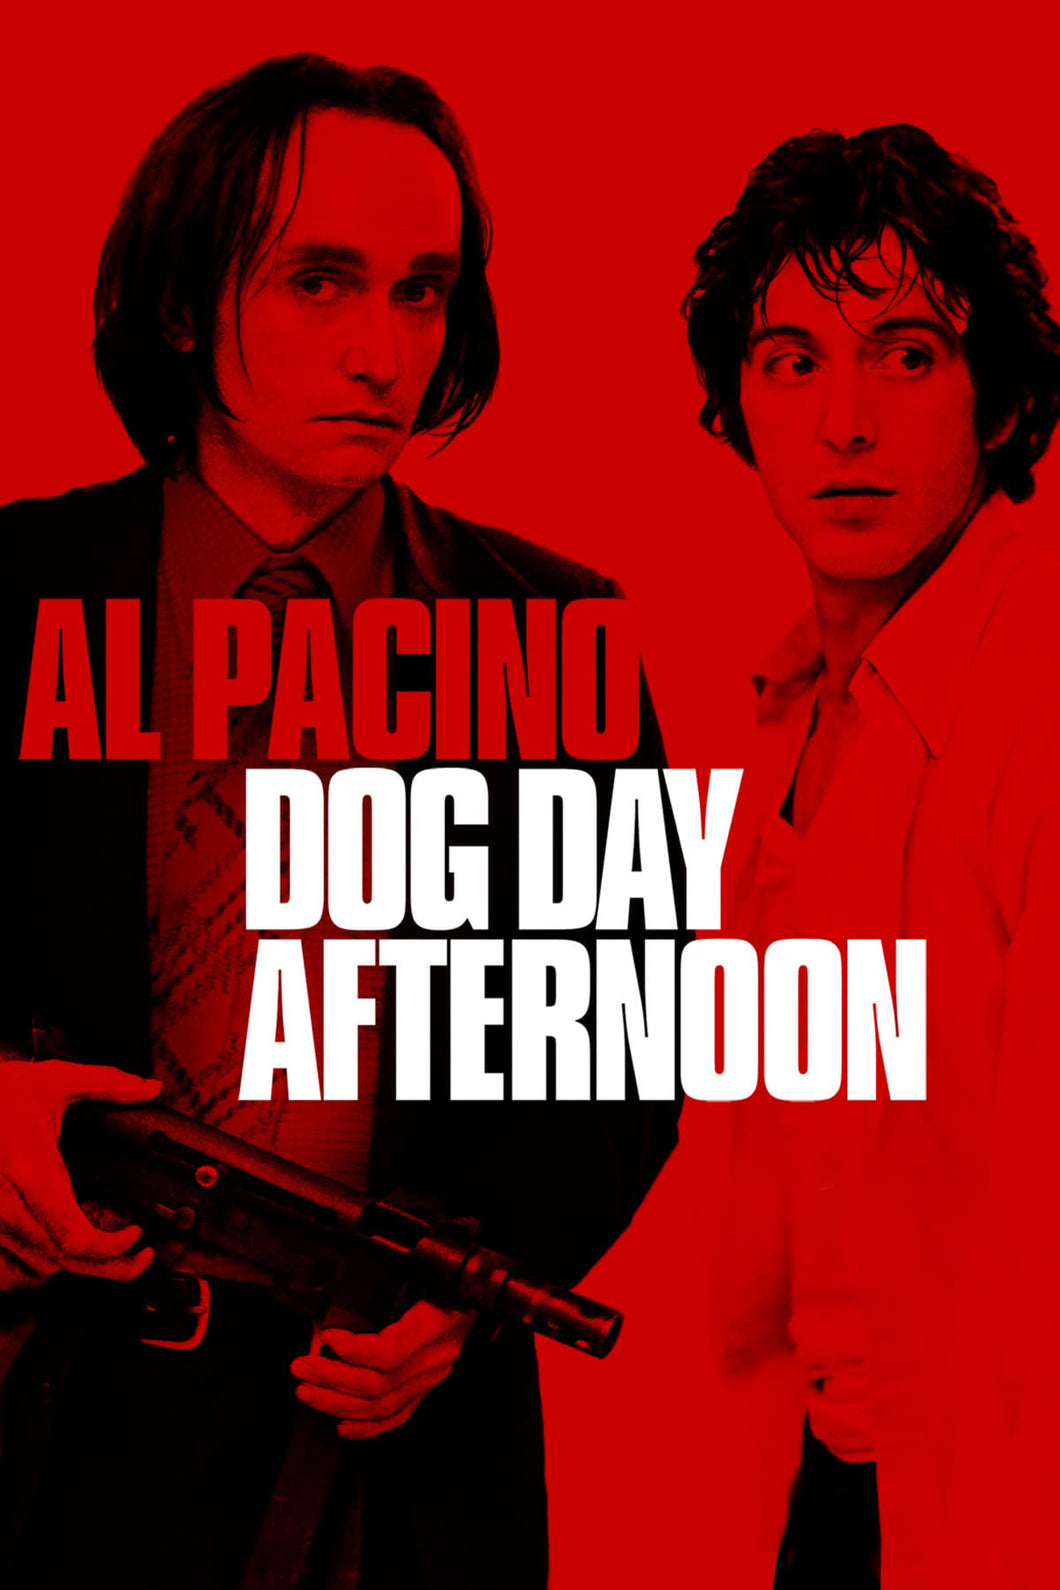 Dog Day Afternoon (1975)A34 Movie Poster High Quality Glossy Paper A1 A2 A3 A4 A3 Framed or Unframed!!!